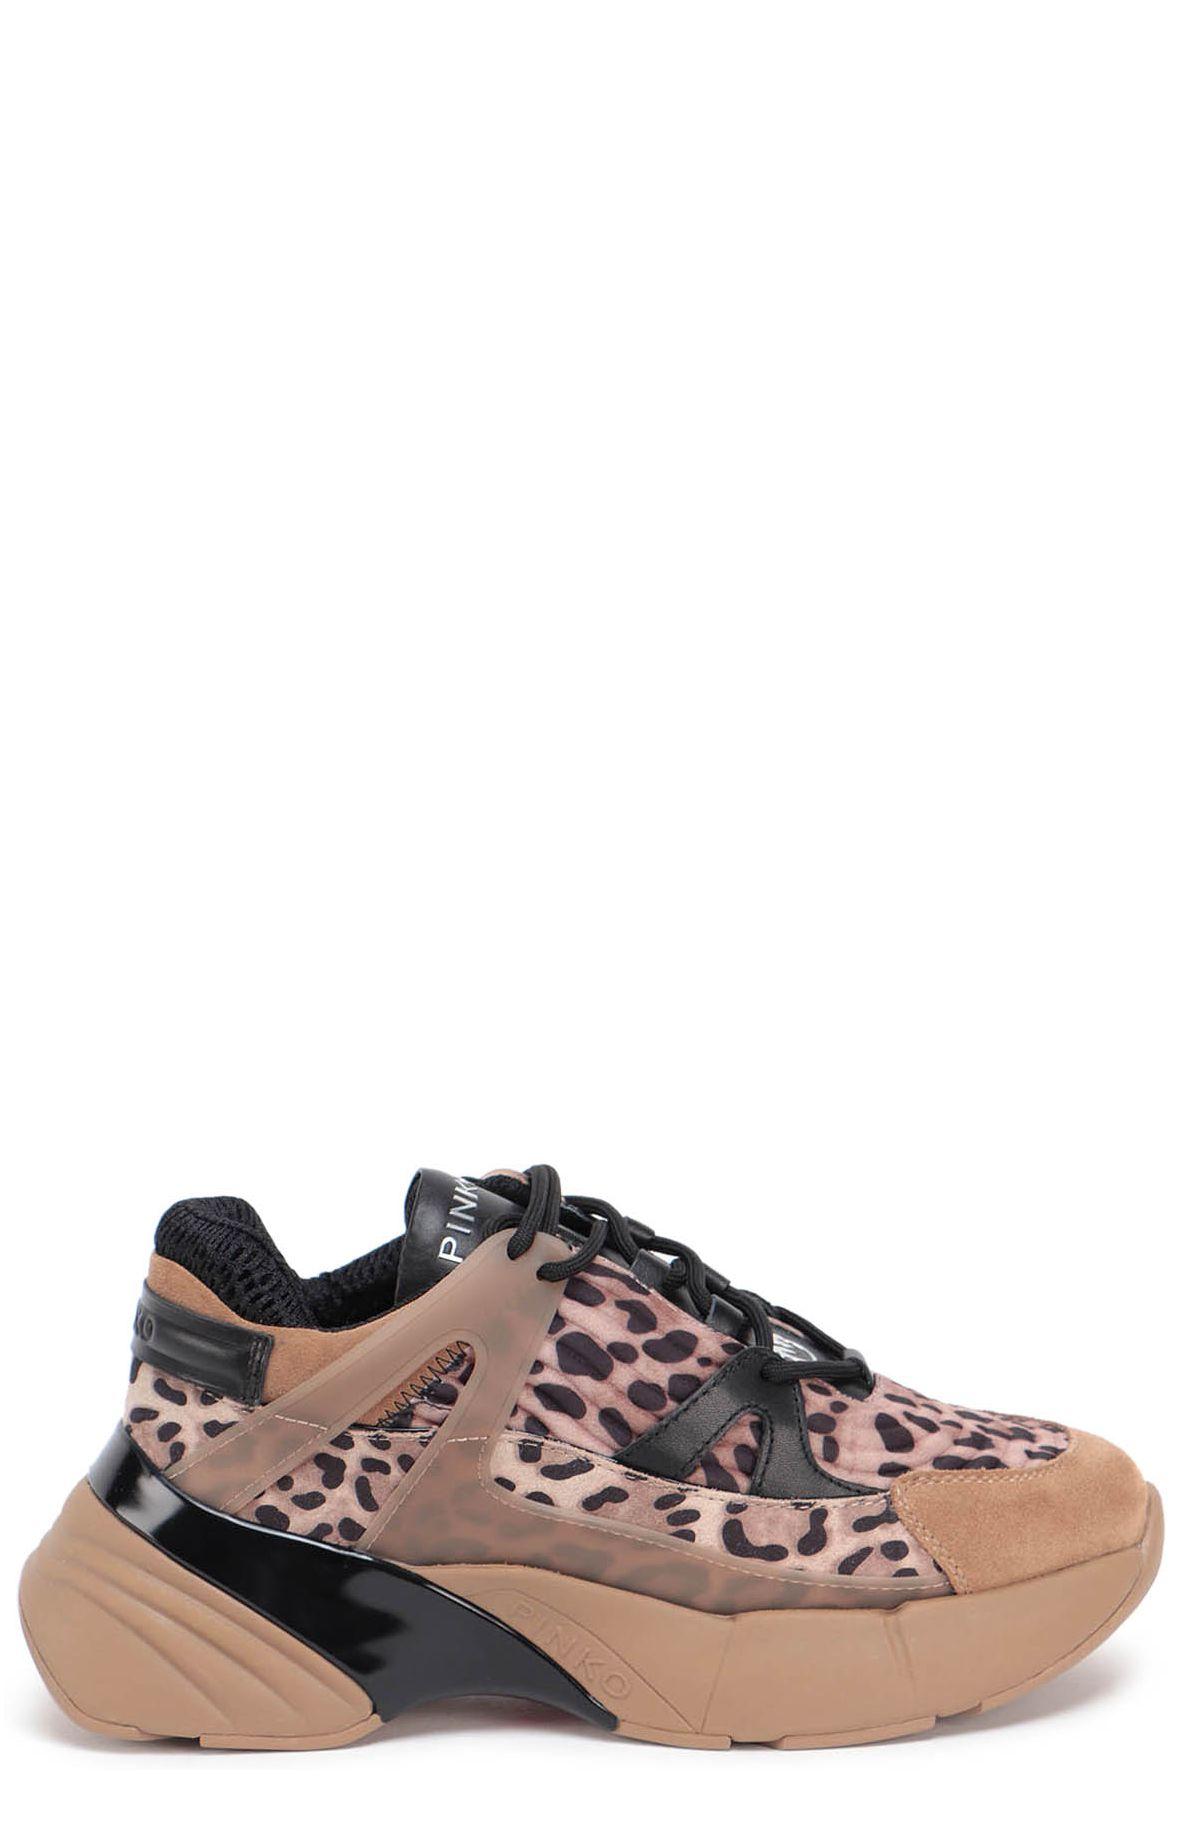 Pinko Leather Leopard Print Chunky Sole Sneakers in Beige (Natural) - Lyst